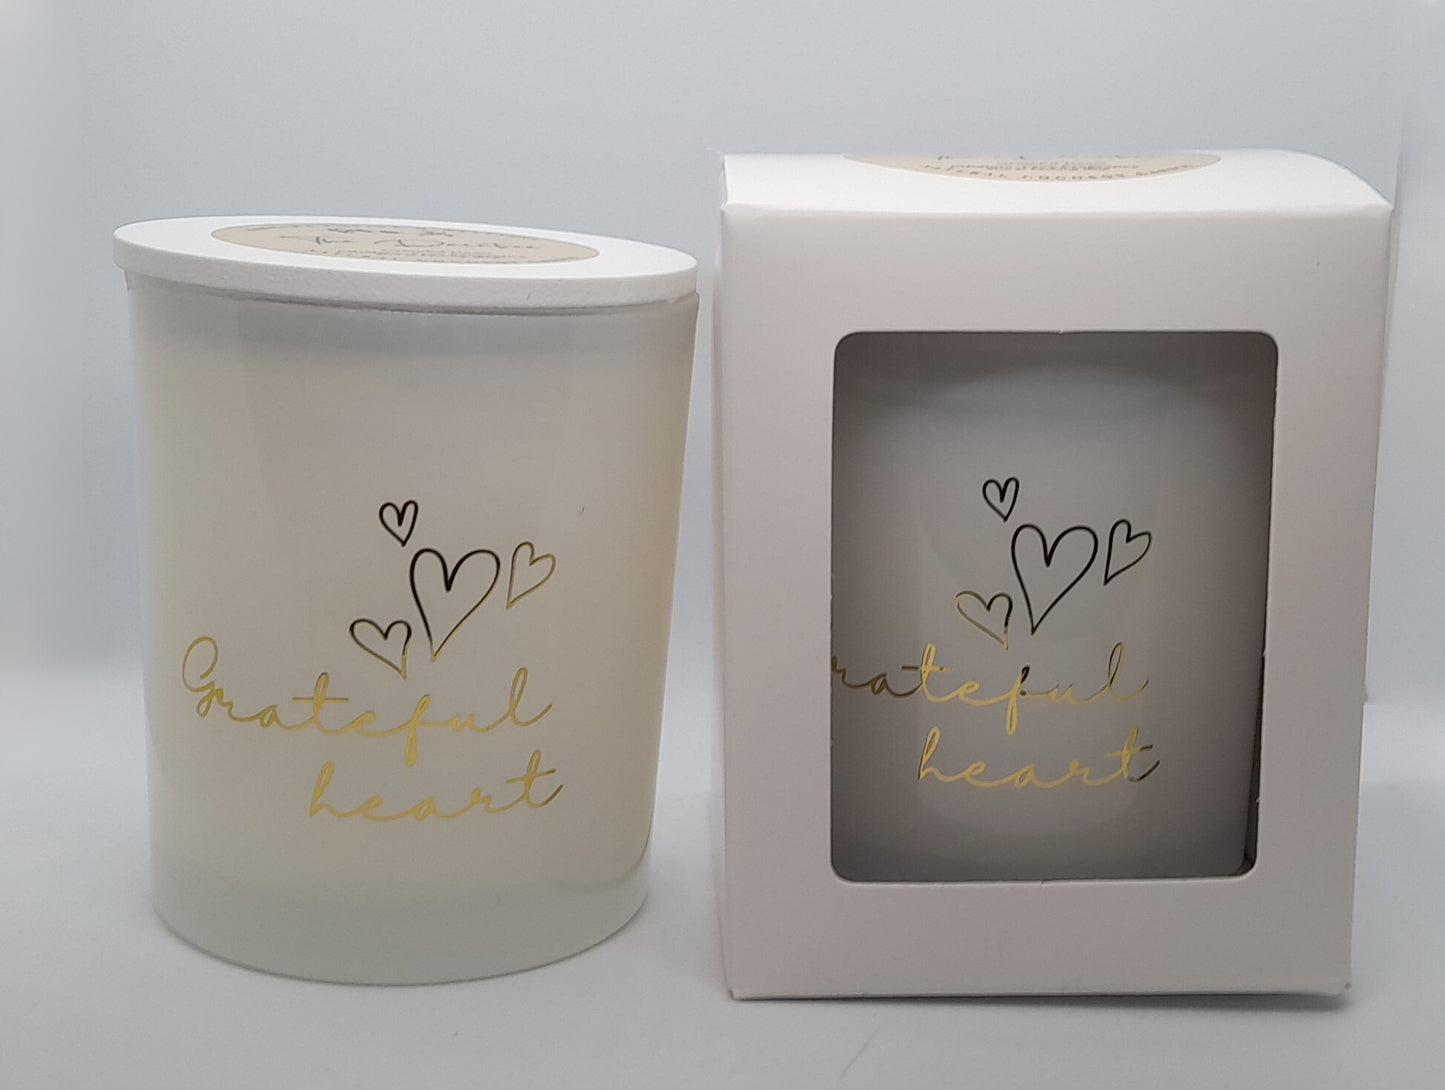 The Gratitude Candle Collection